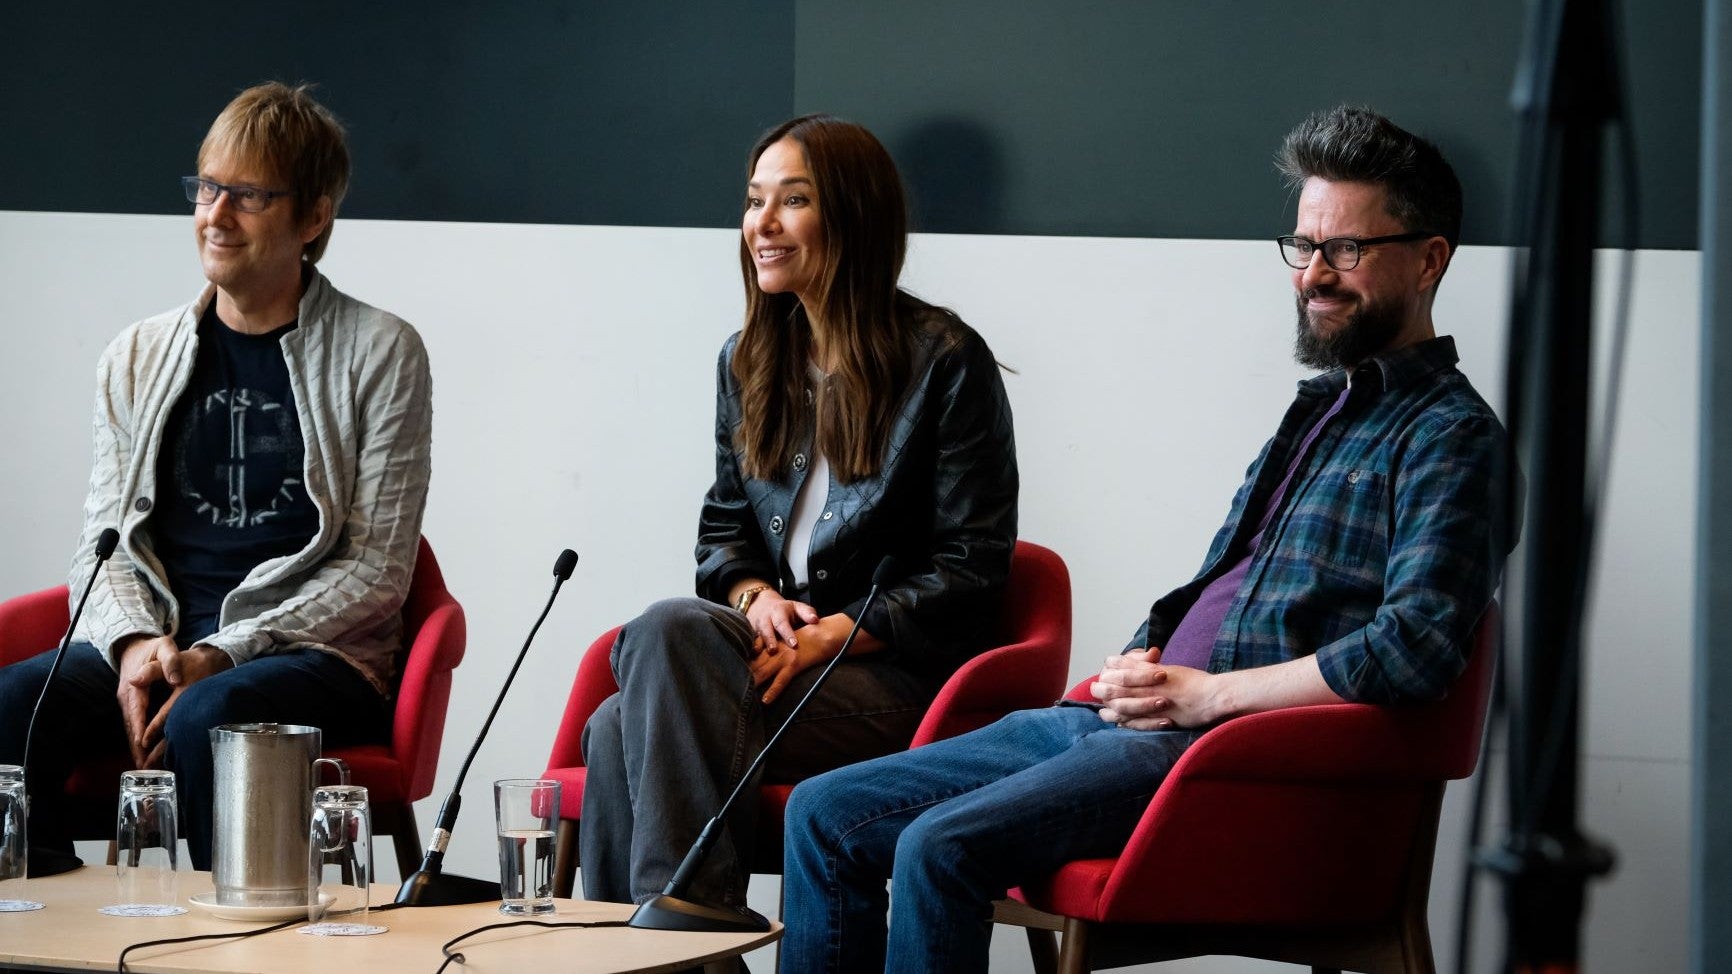 Mark Cerny, Jade Raymond, and Leon O'Reilly at a panel discussion